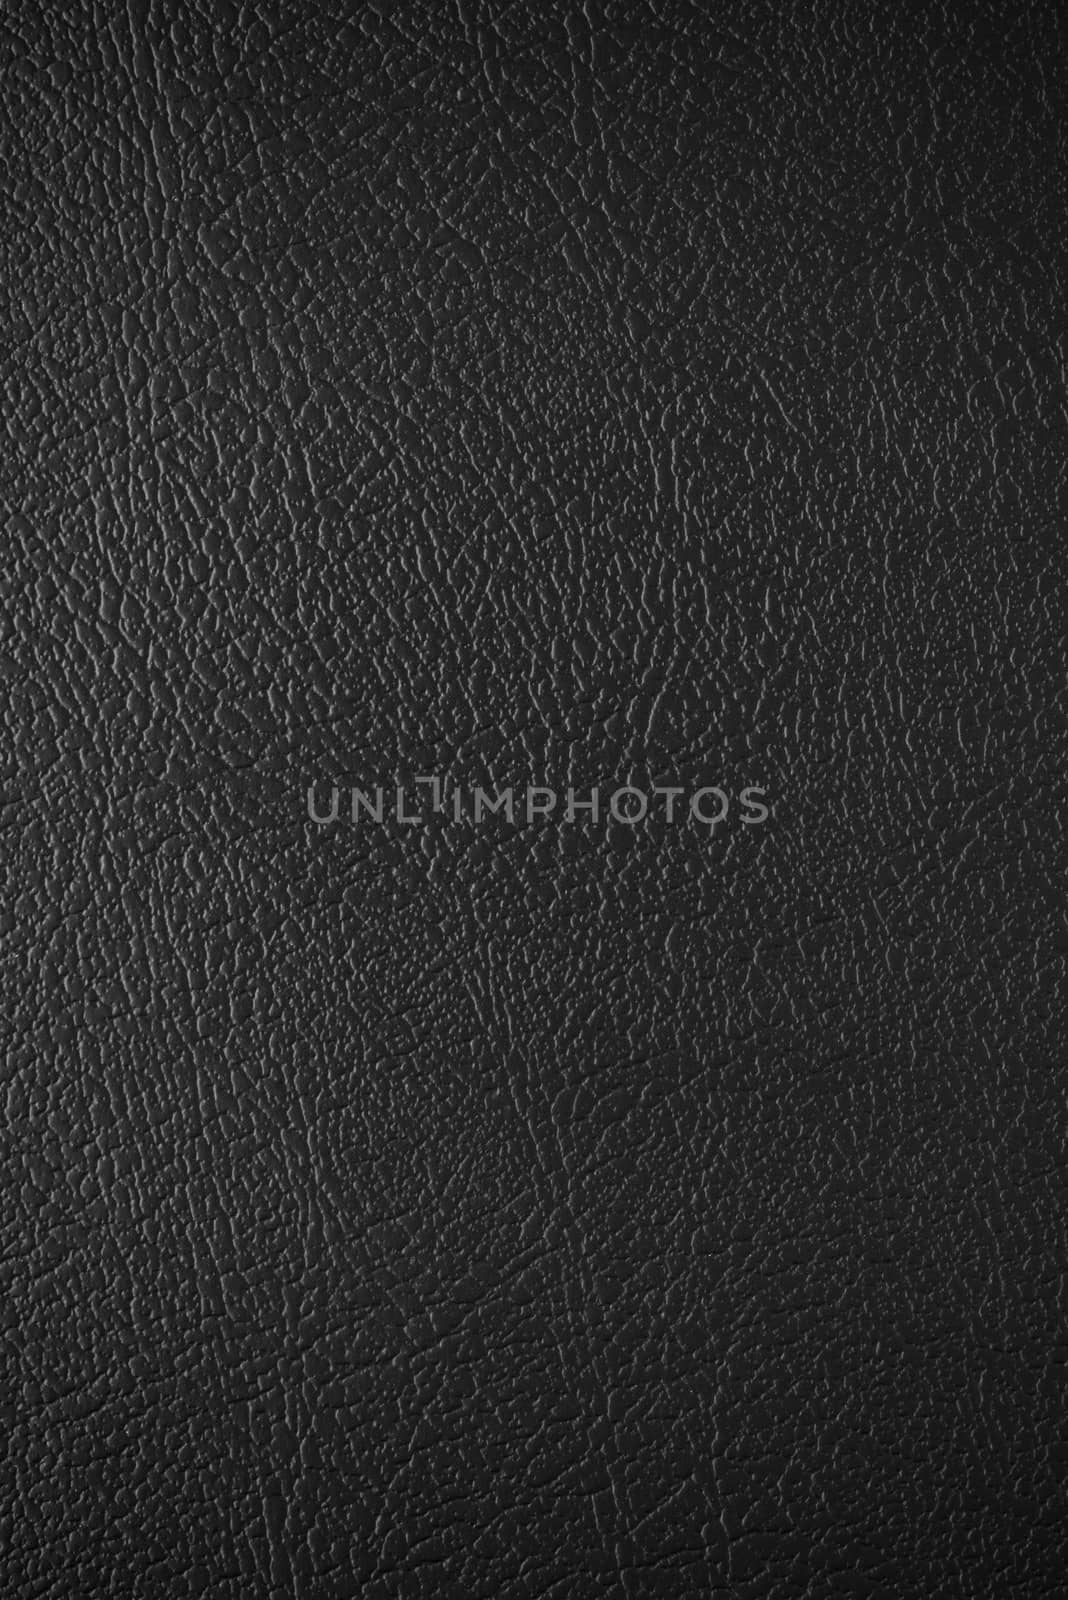 leather texture by antpkr